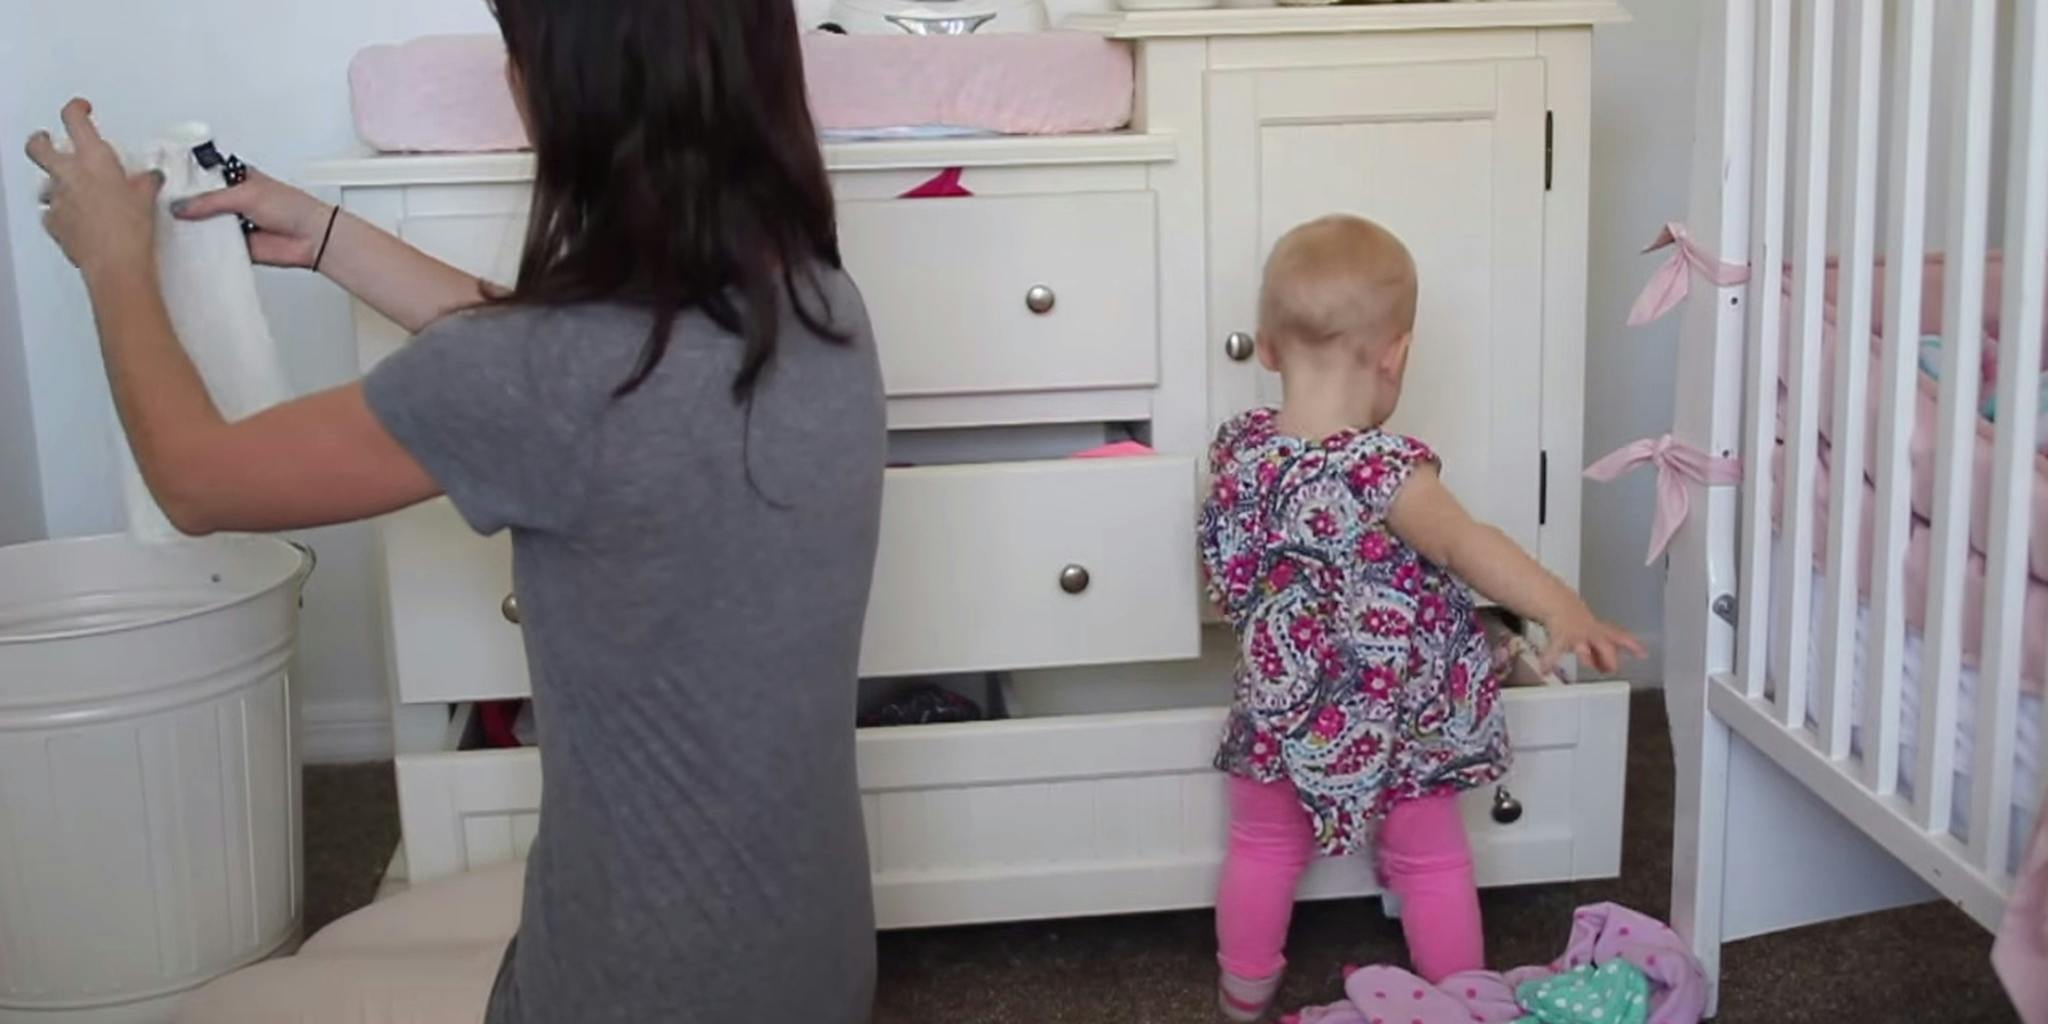 This Video Perfectly Captures How Difficult Motherhood Is The Daily Dot 